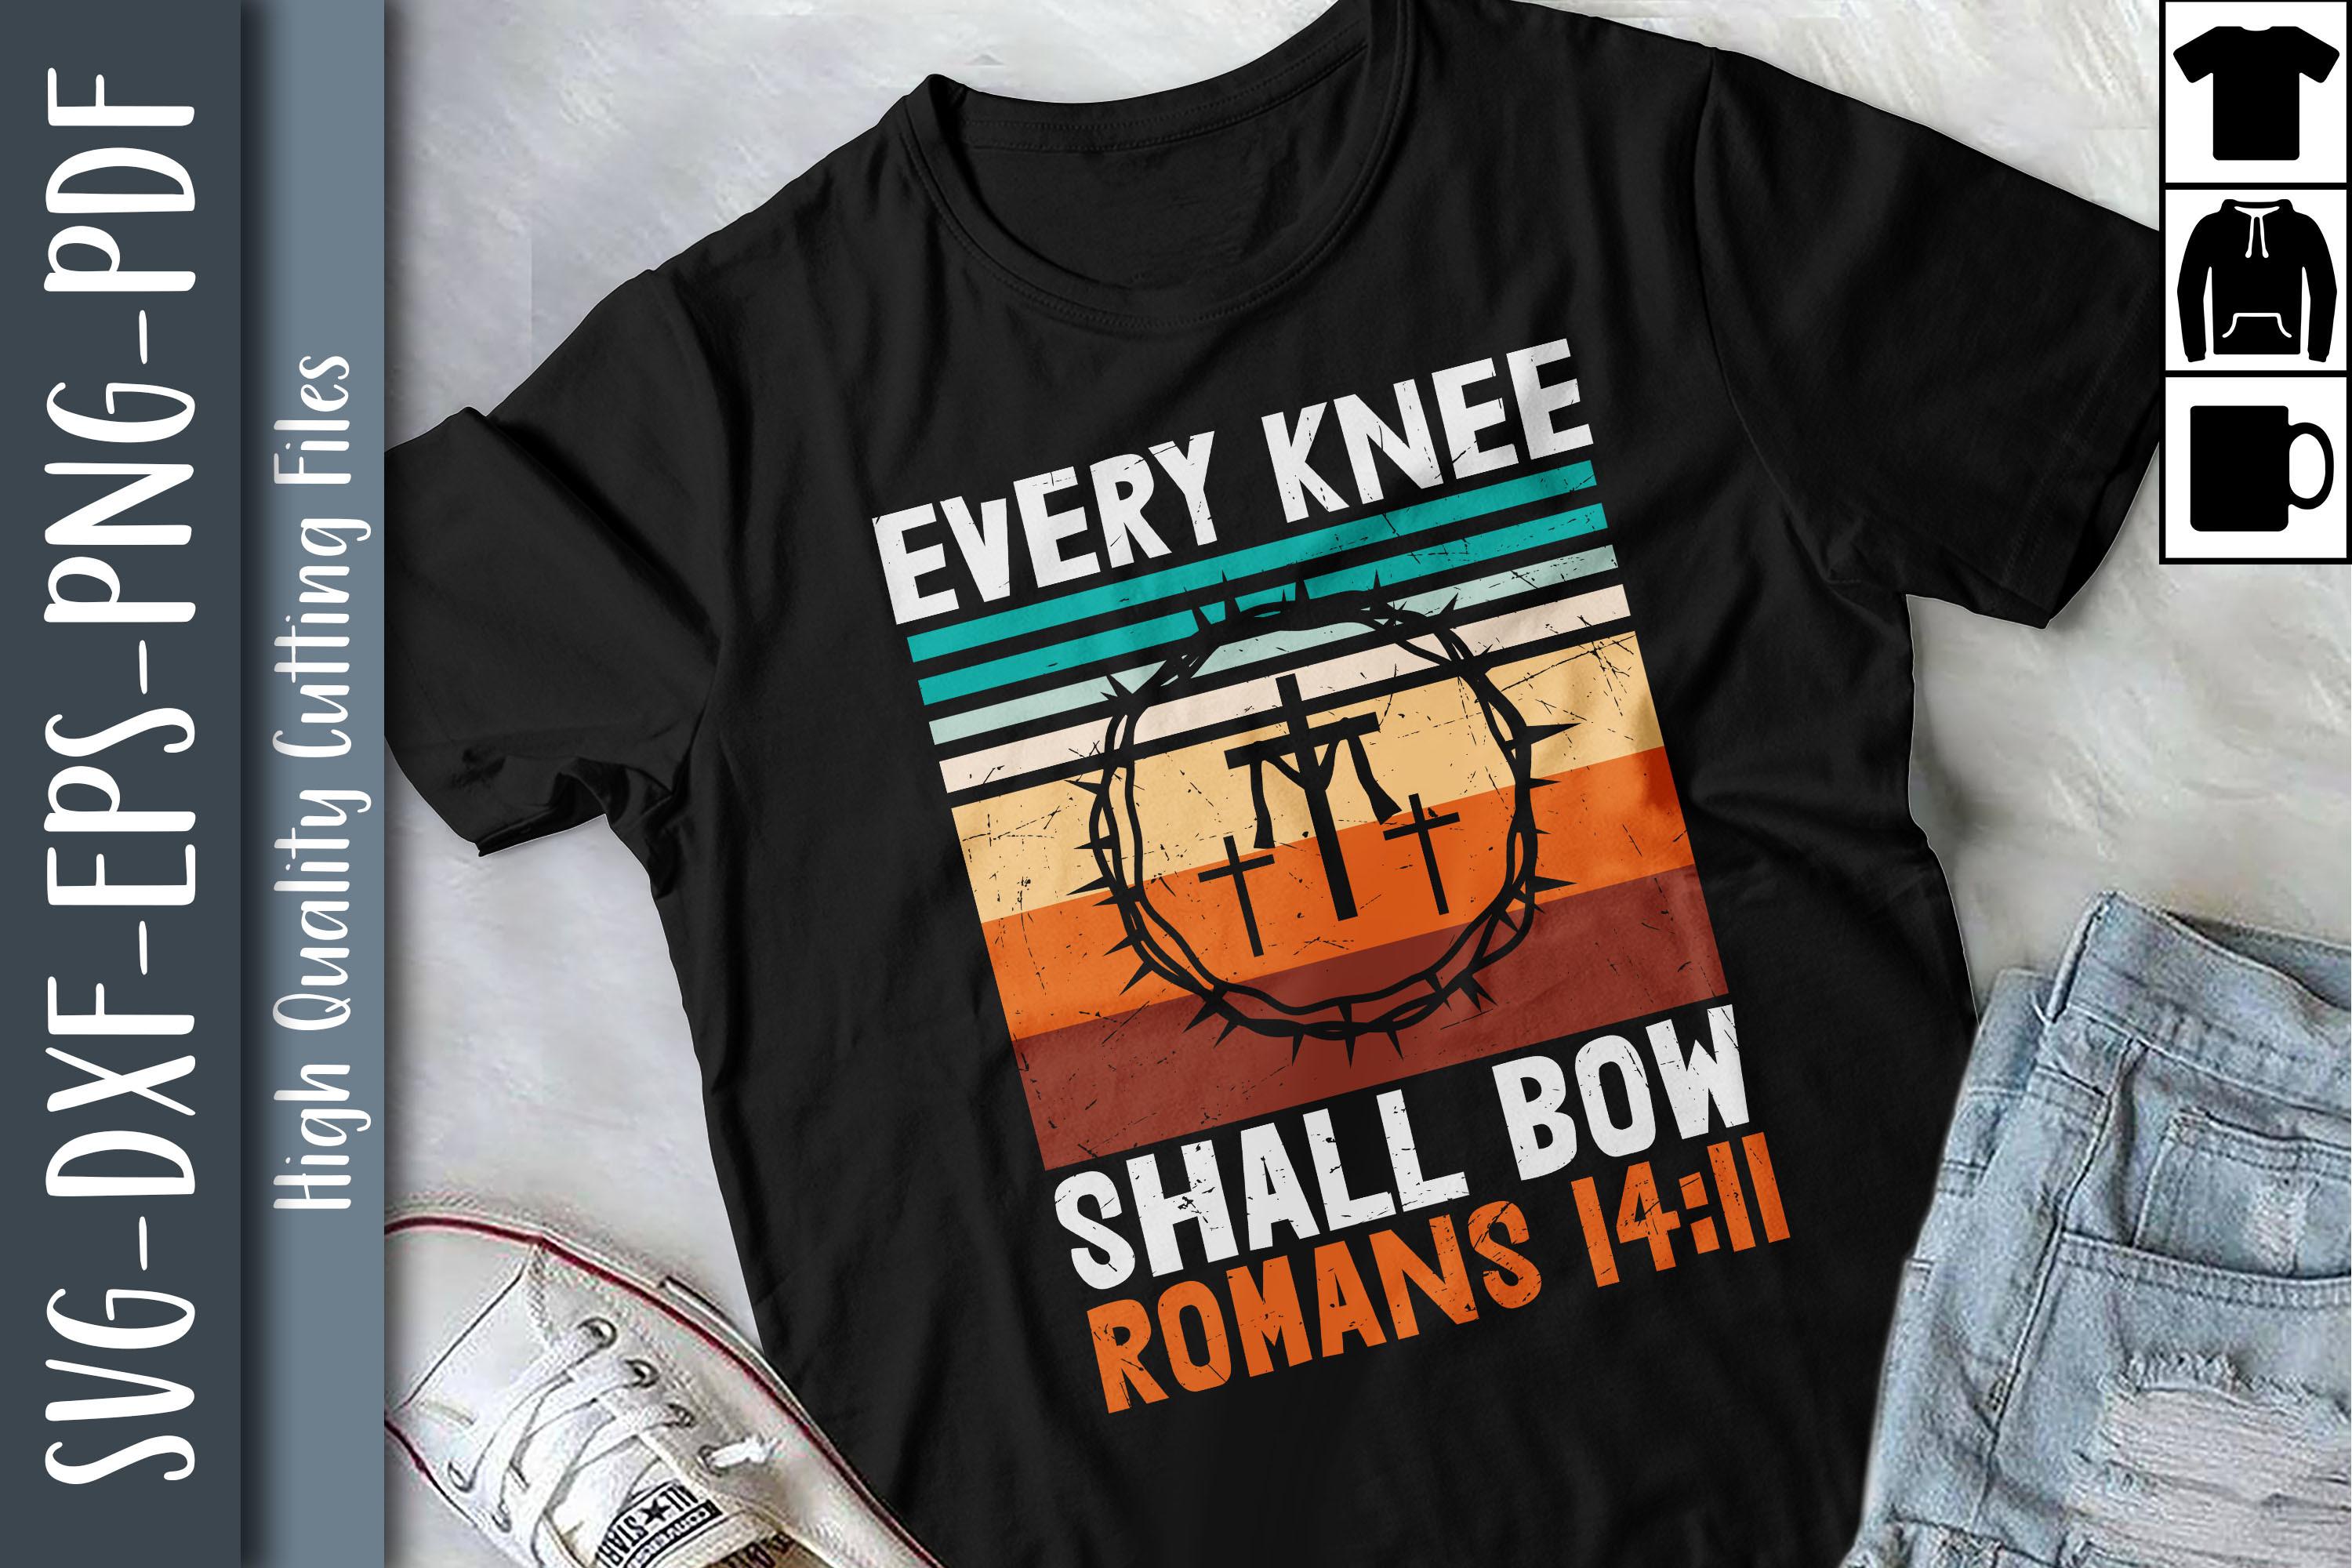 Every Knee Shall Bow Romans 14:11